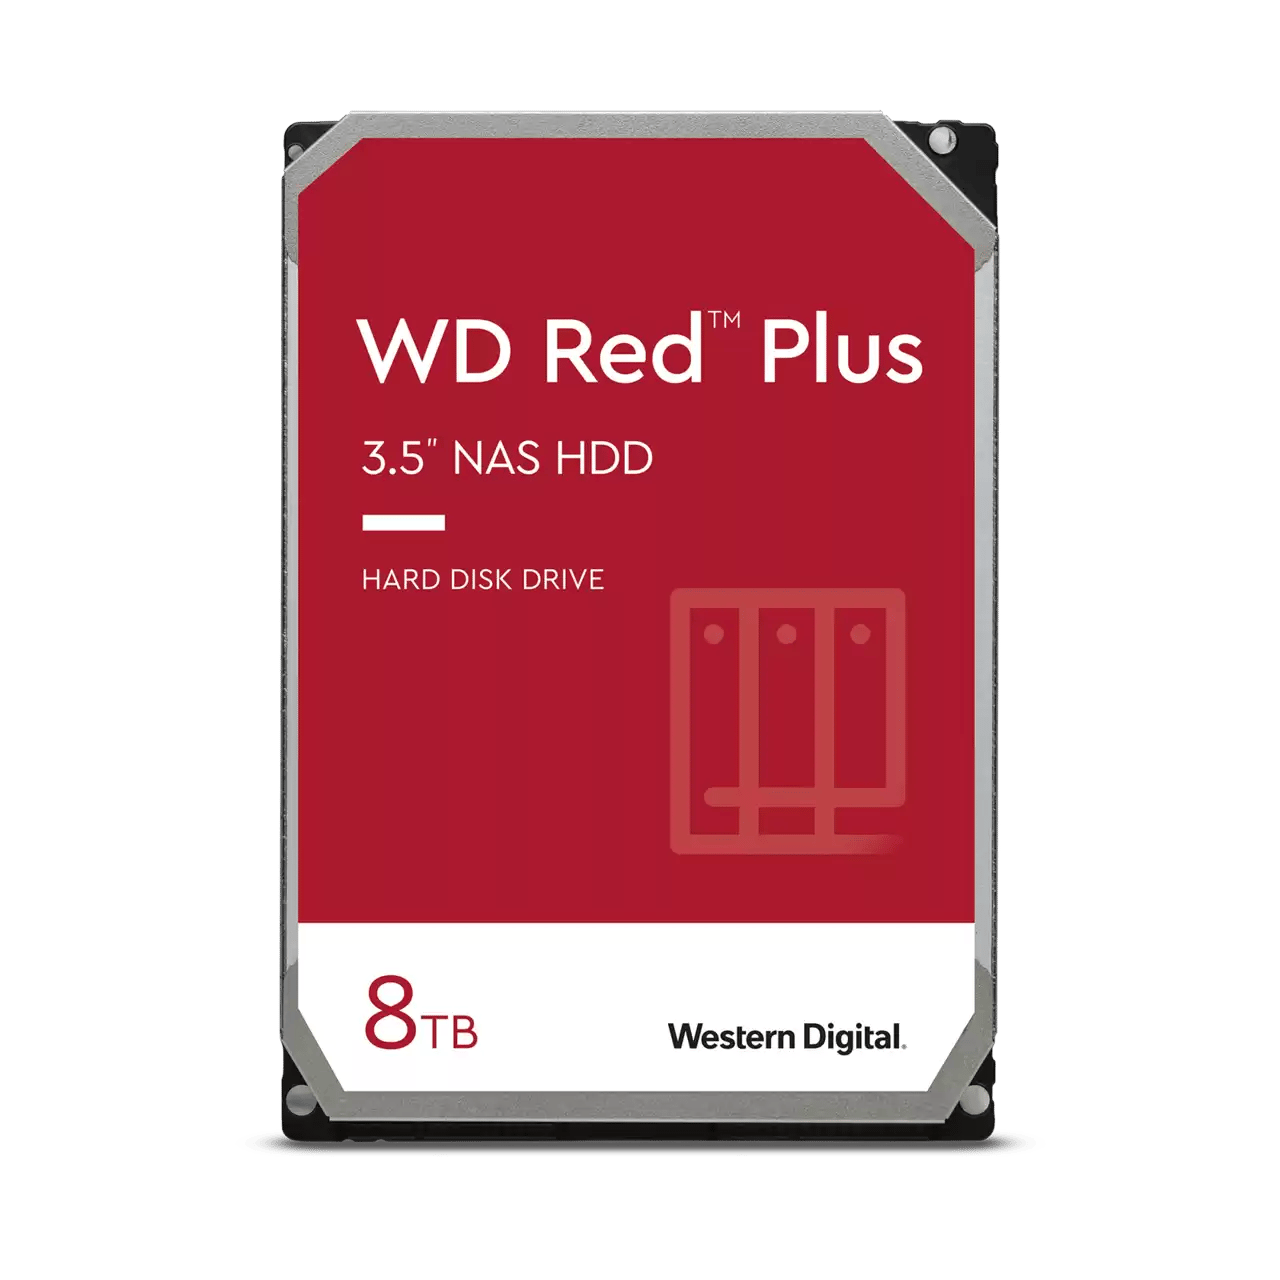 WD Red Plus 8TB 5640rpm 128MB 3.5" NAS HDD (WD80EFZZ)